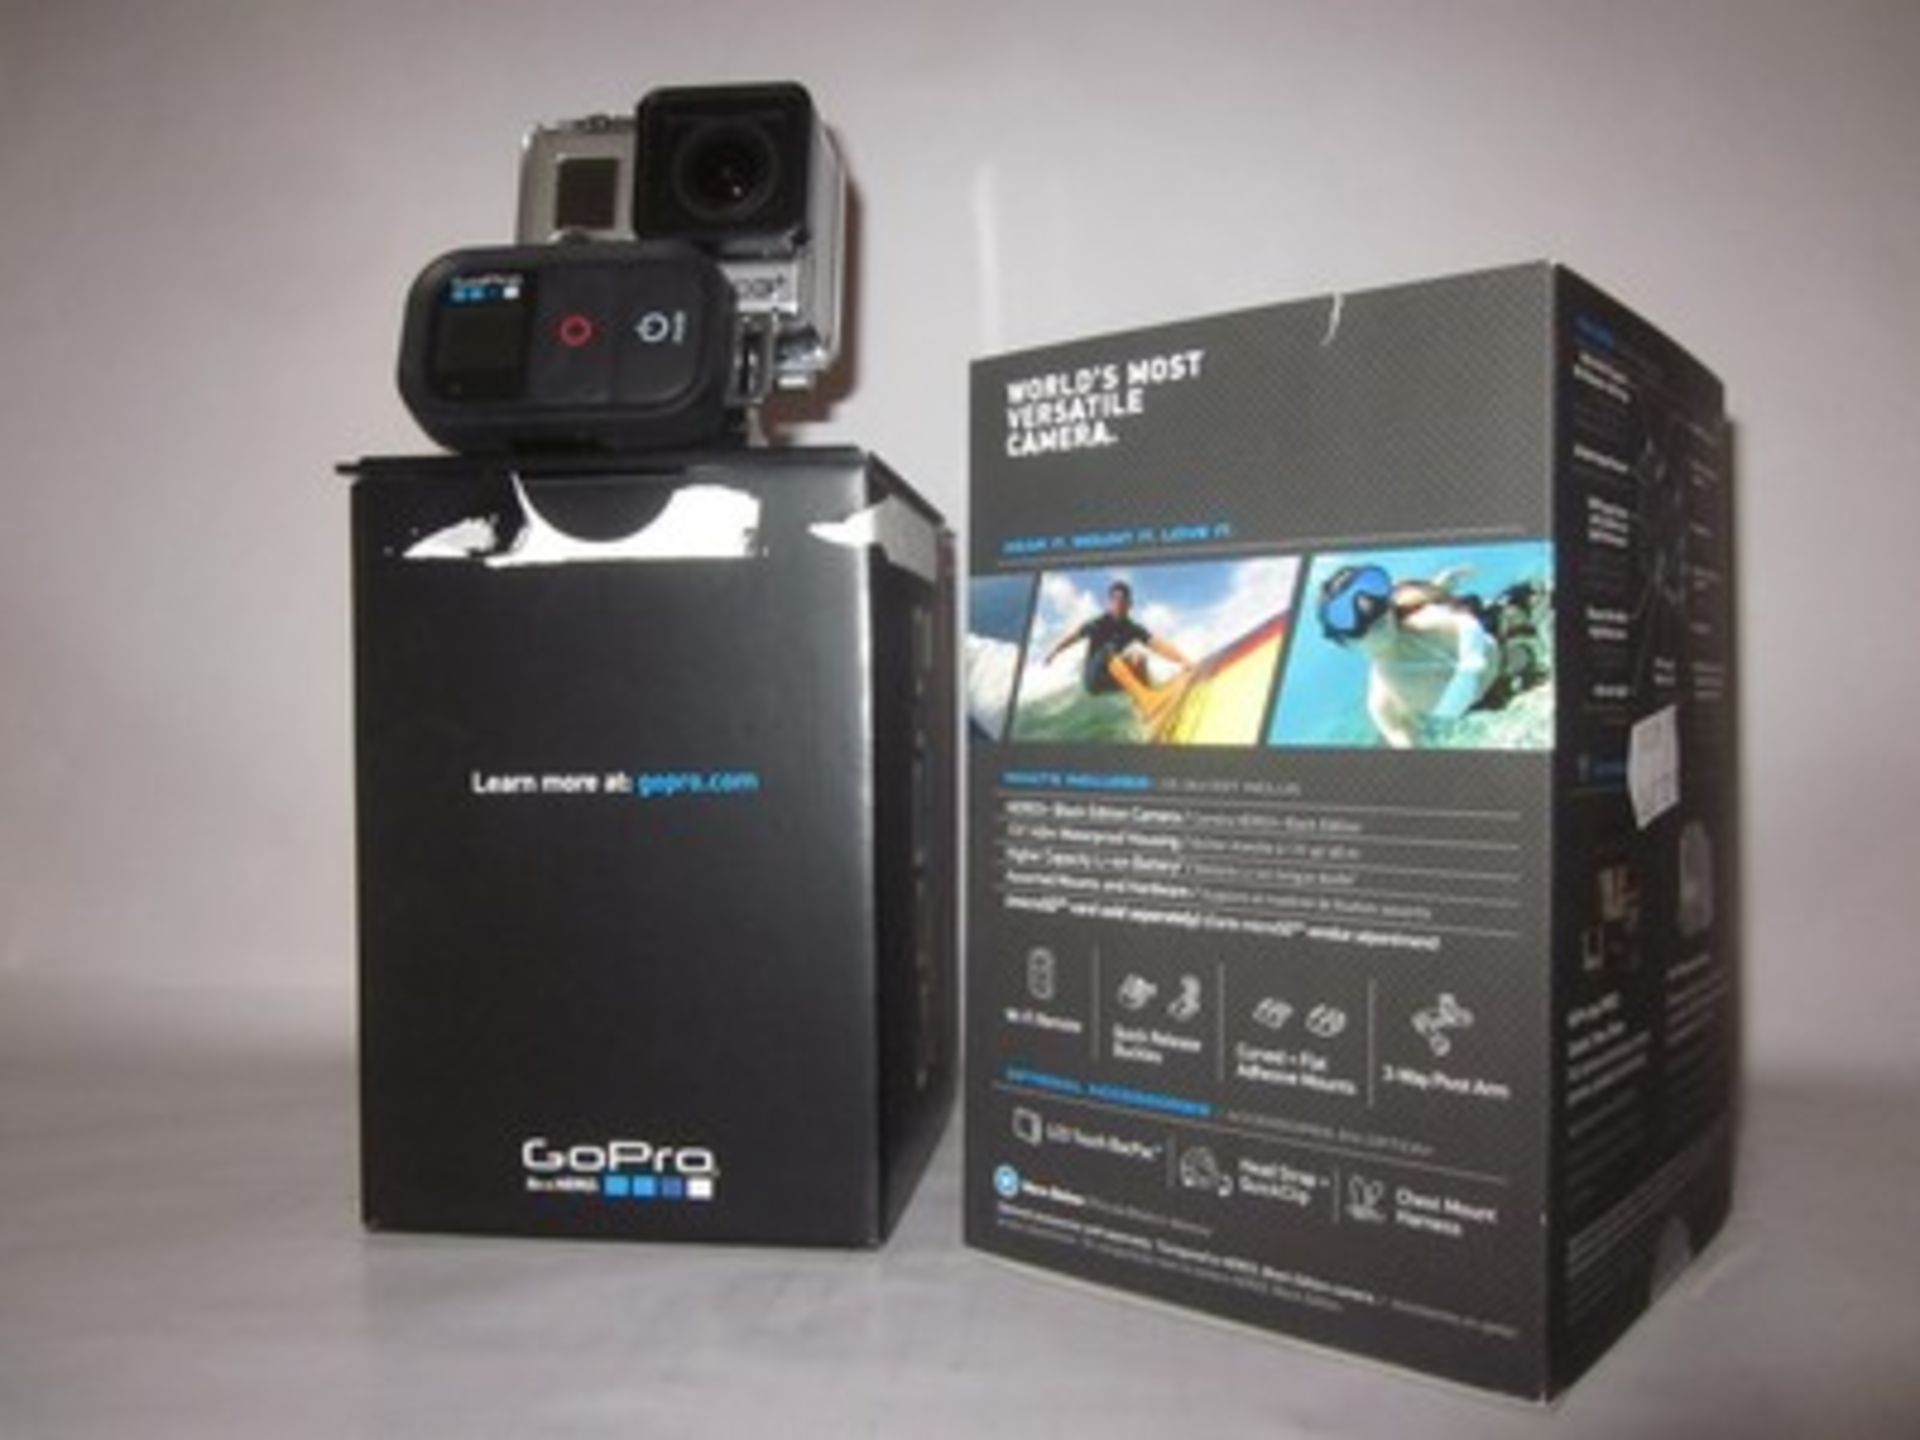 *A GoPro Hero 3+ black edition (Boxed as new).Payment and collection by 5pm Friday 15th January.